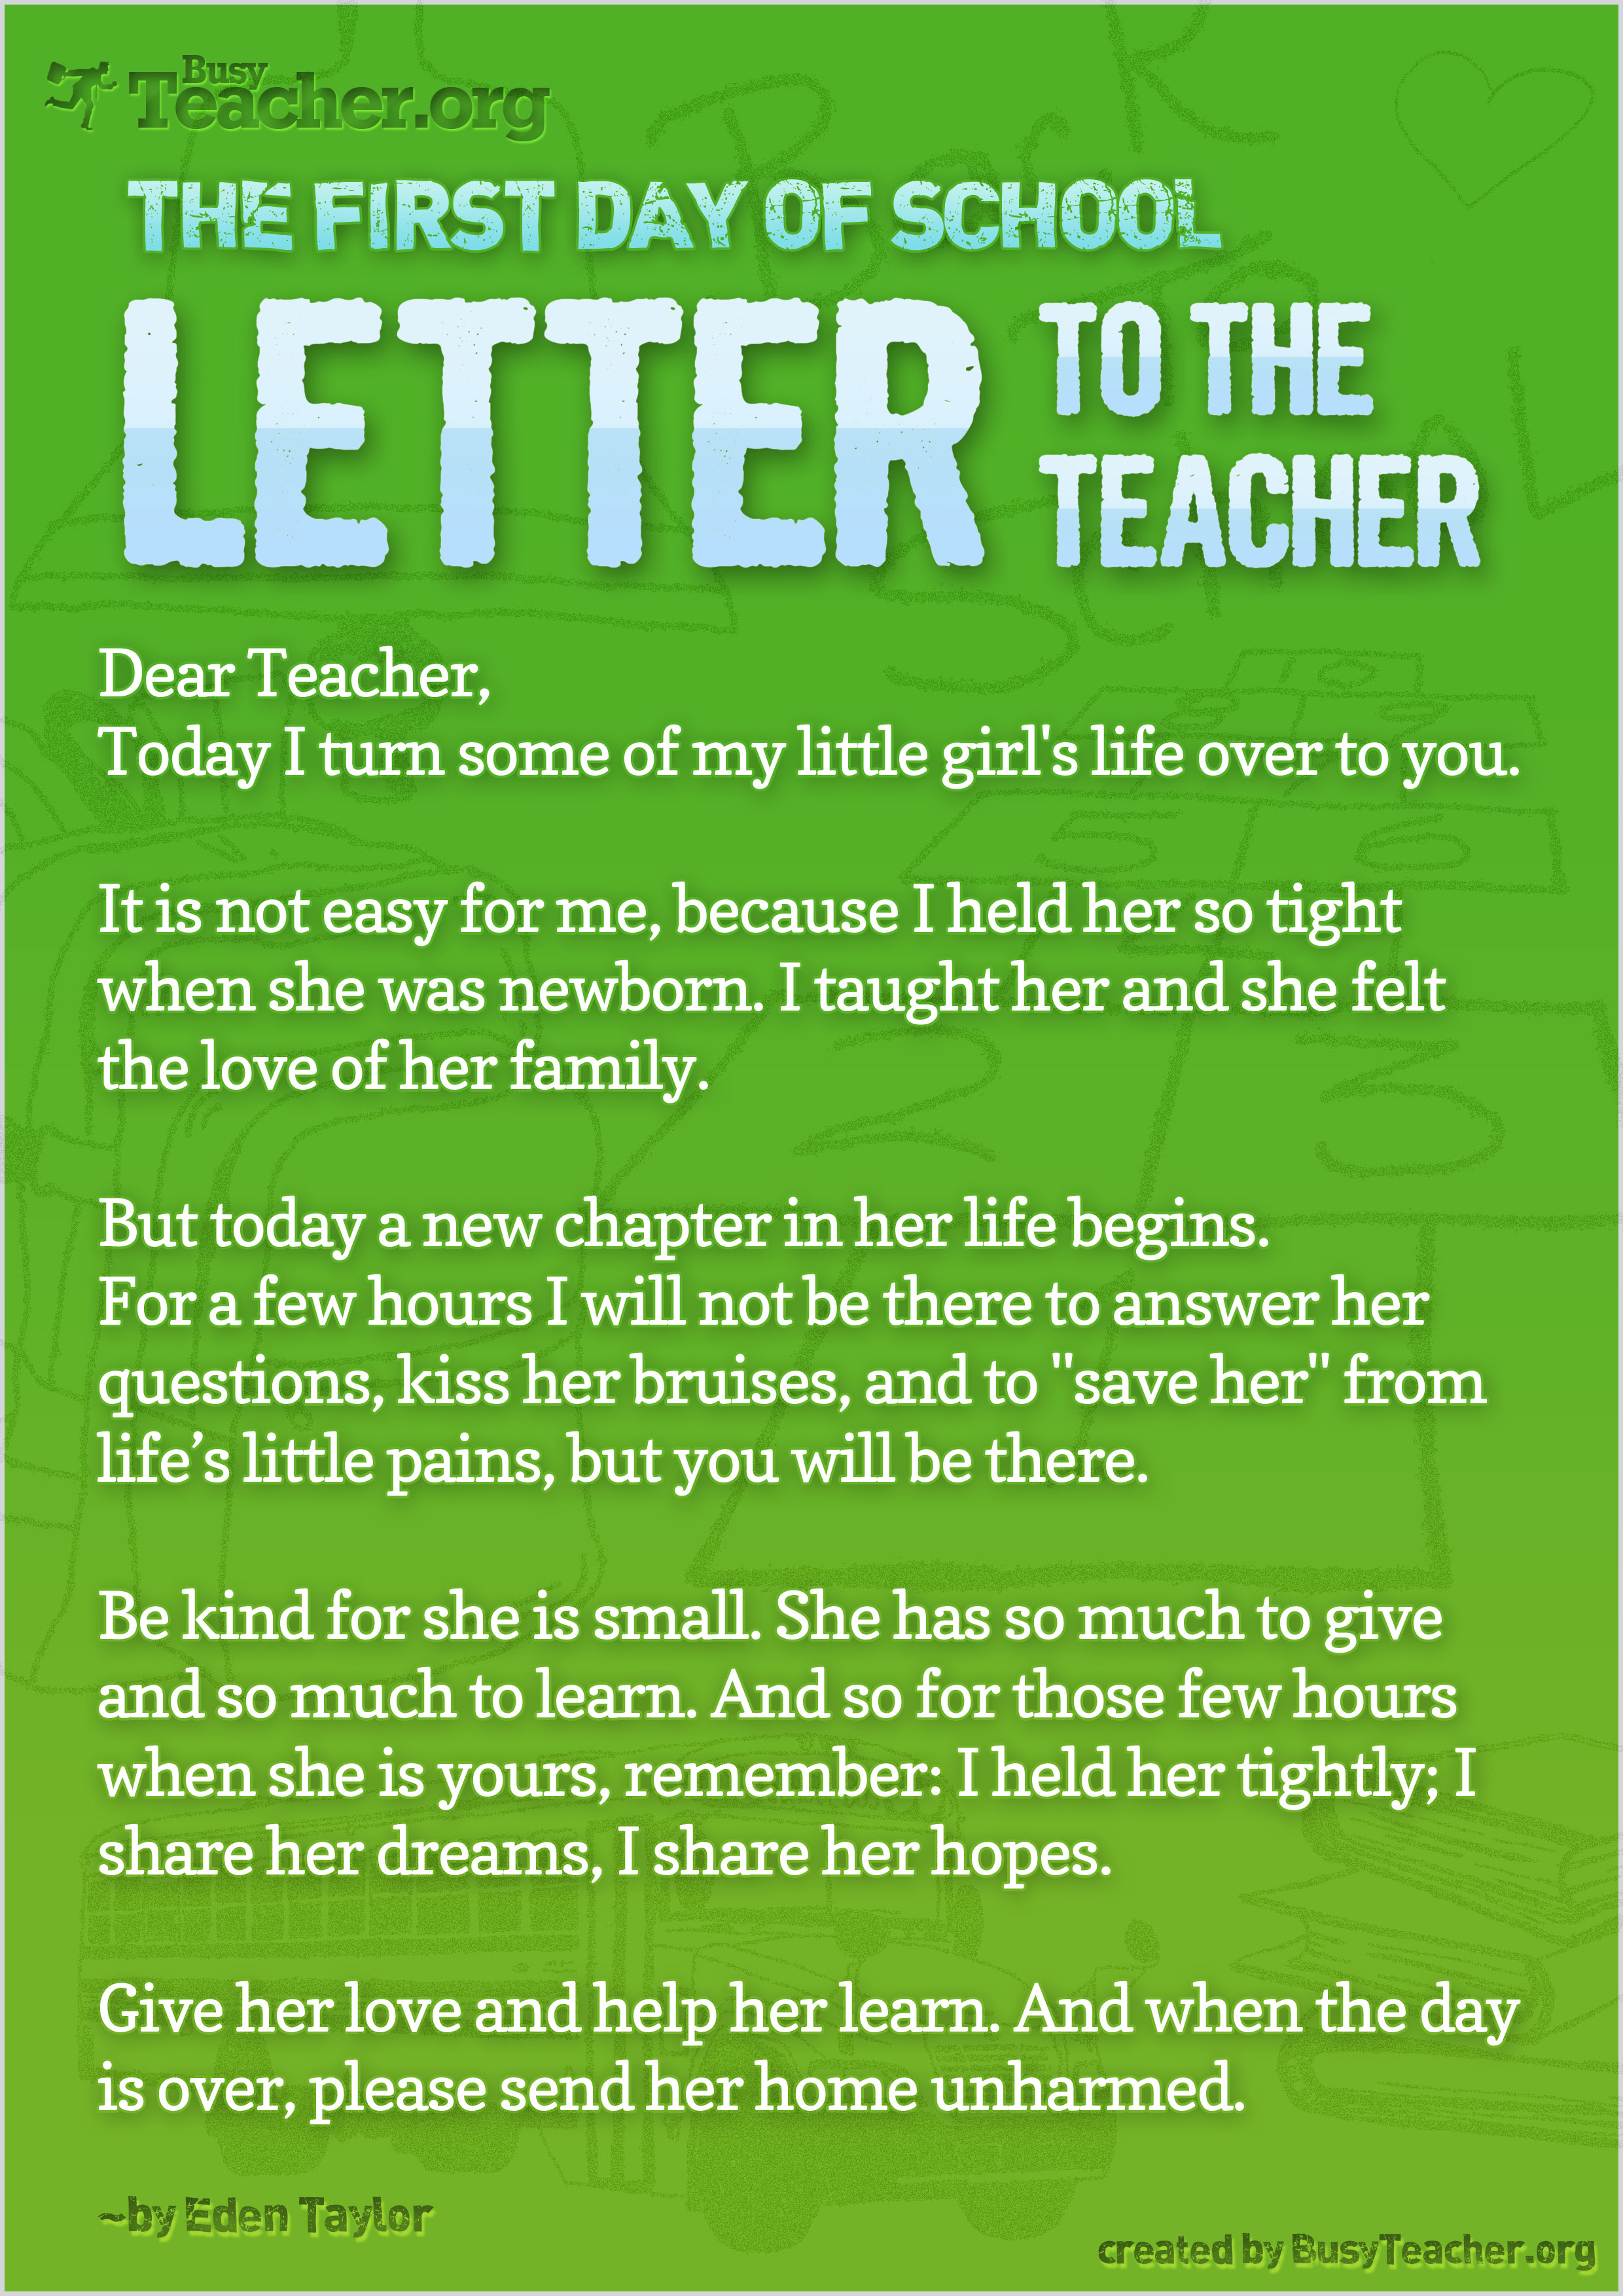 The First Day Of School Letter To The Teacher Poster